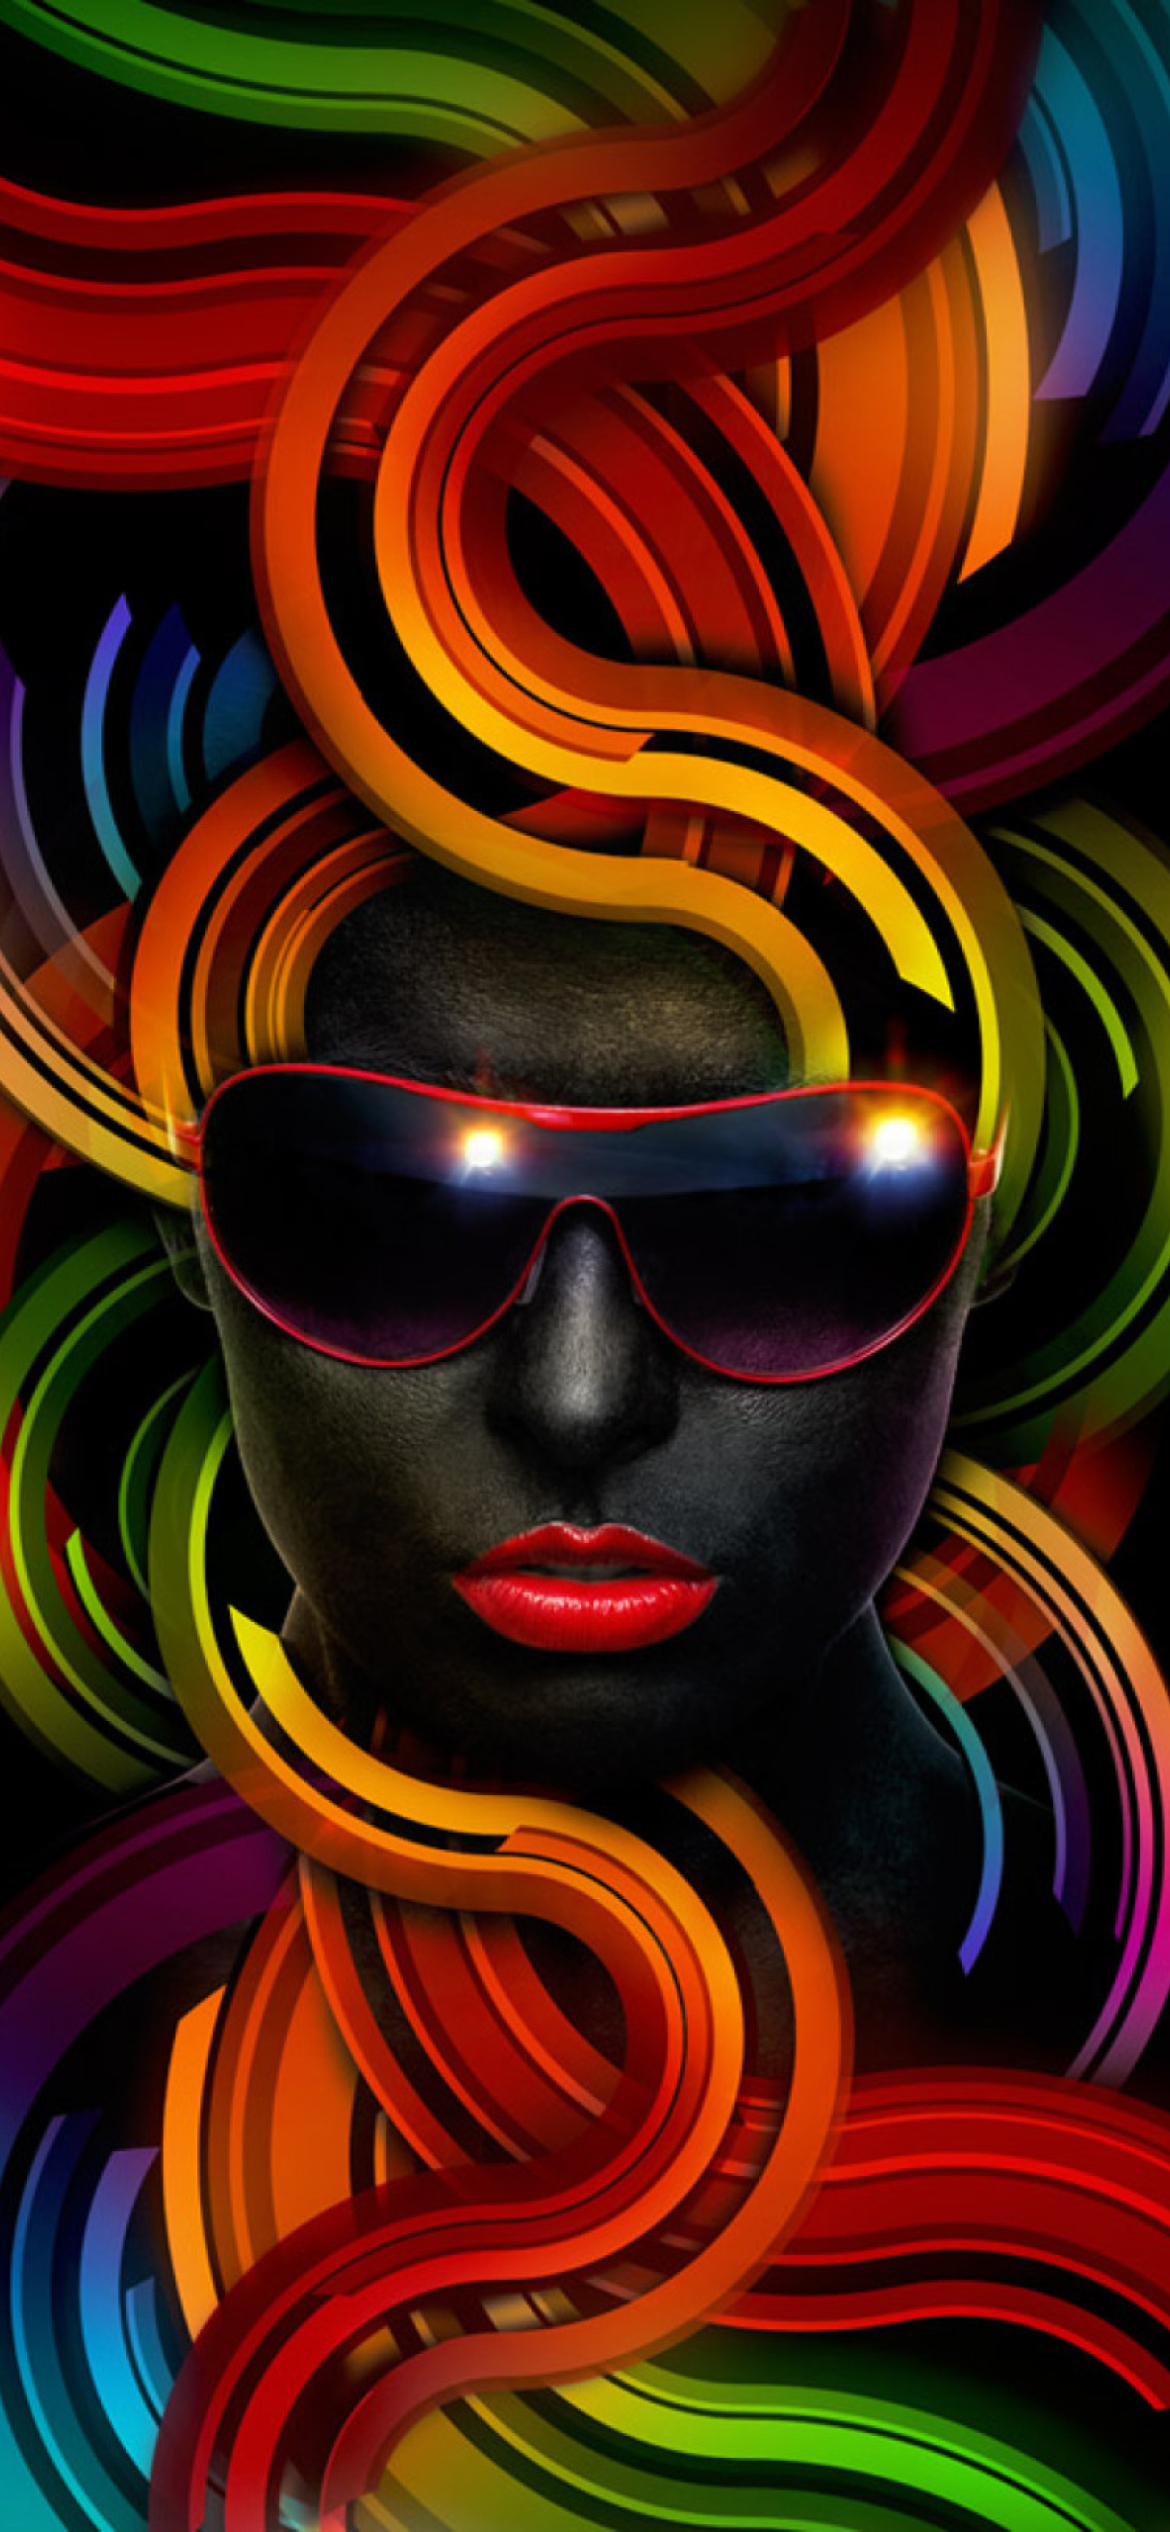 Colorful Face wallpaper 1170x2532